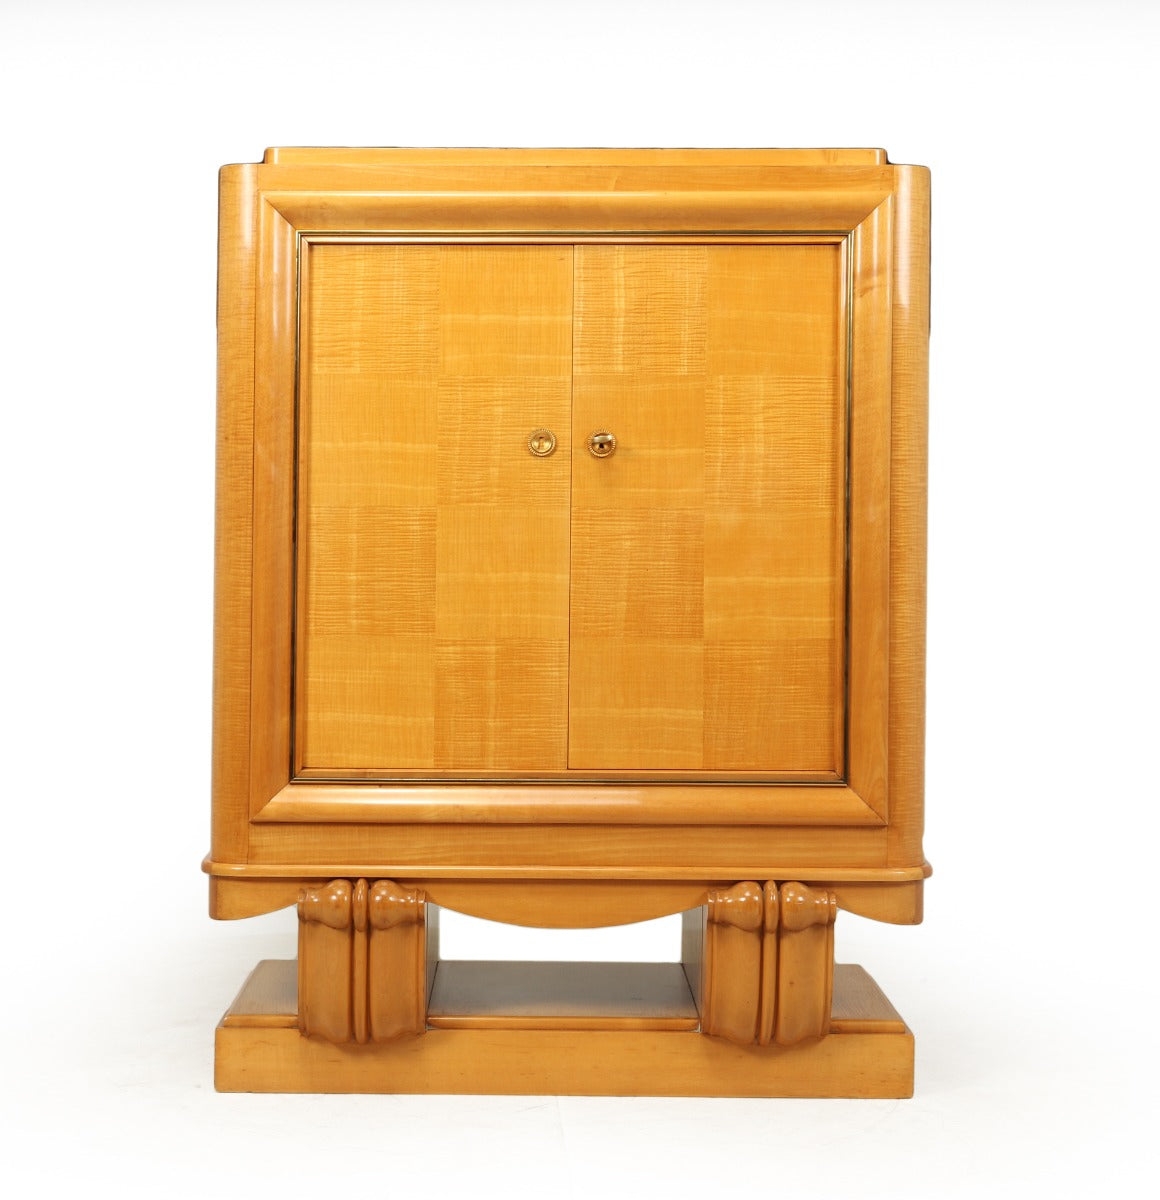 Art Deco Cocktail Cabinet in Sycamore – The Furniture Rooms